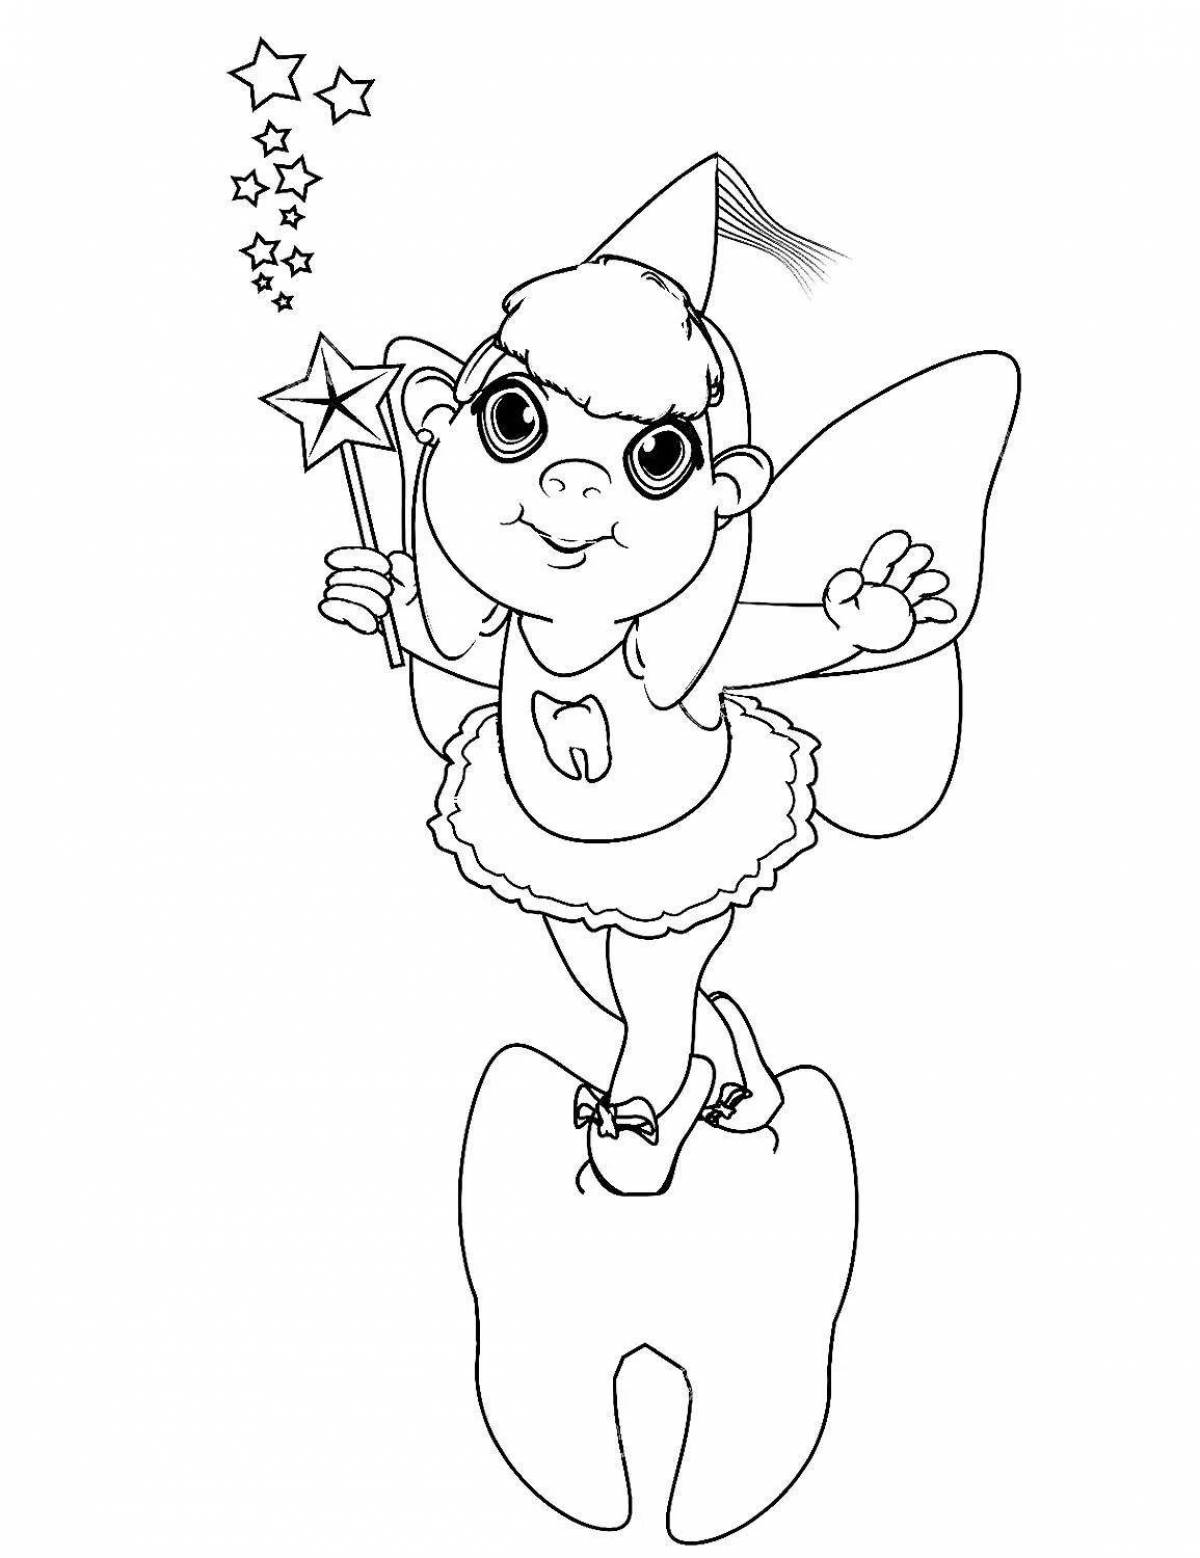 Fairy tooth fairy coloring book for kids